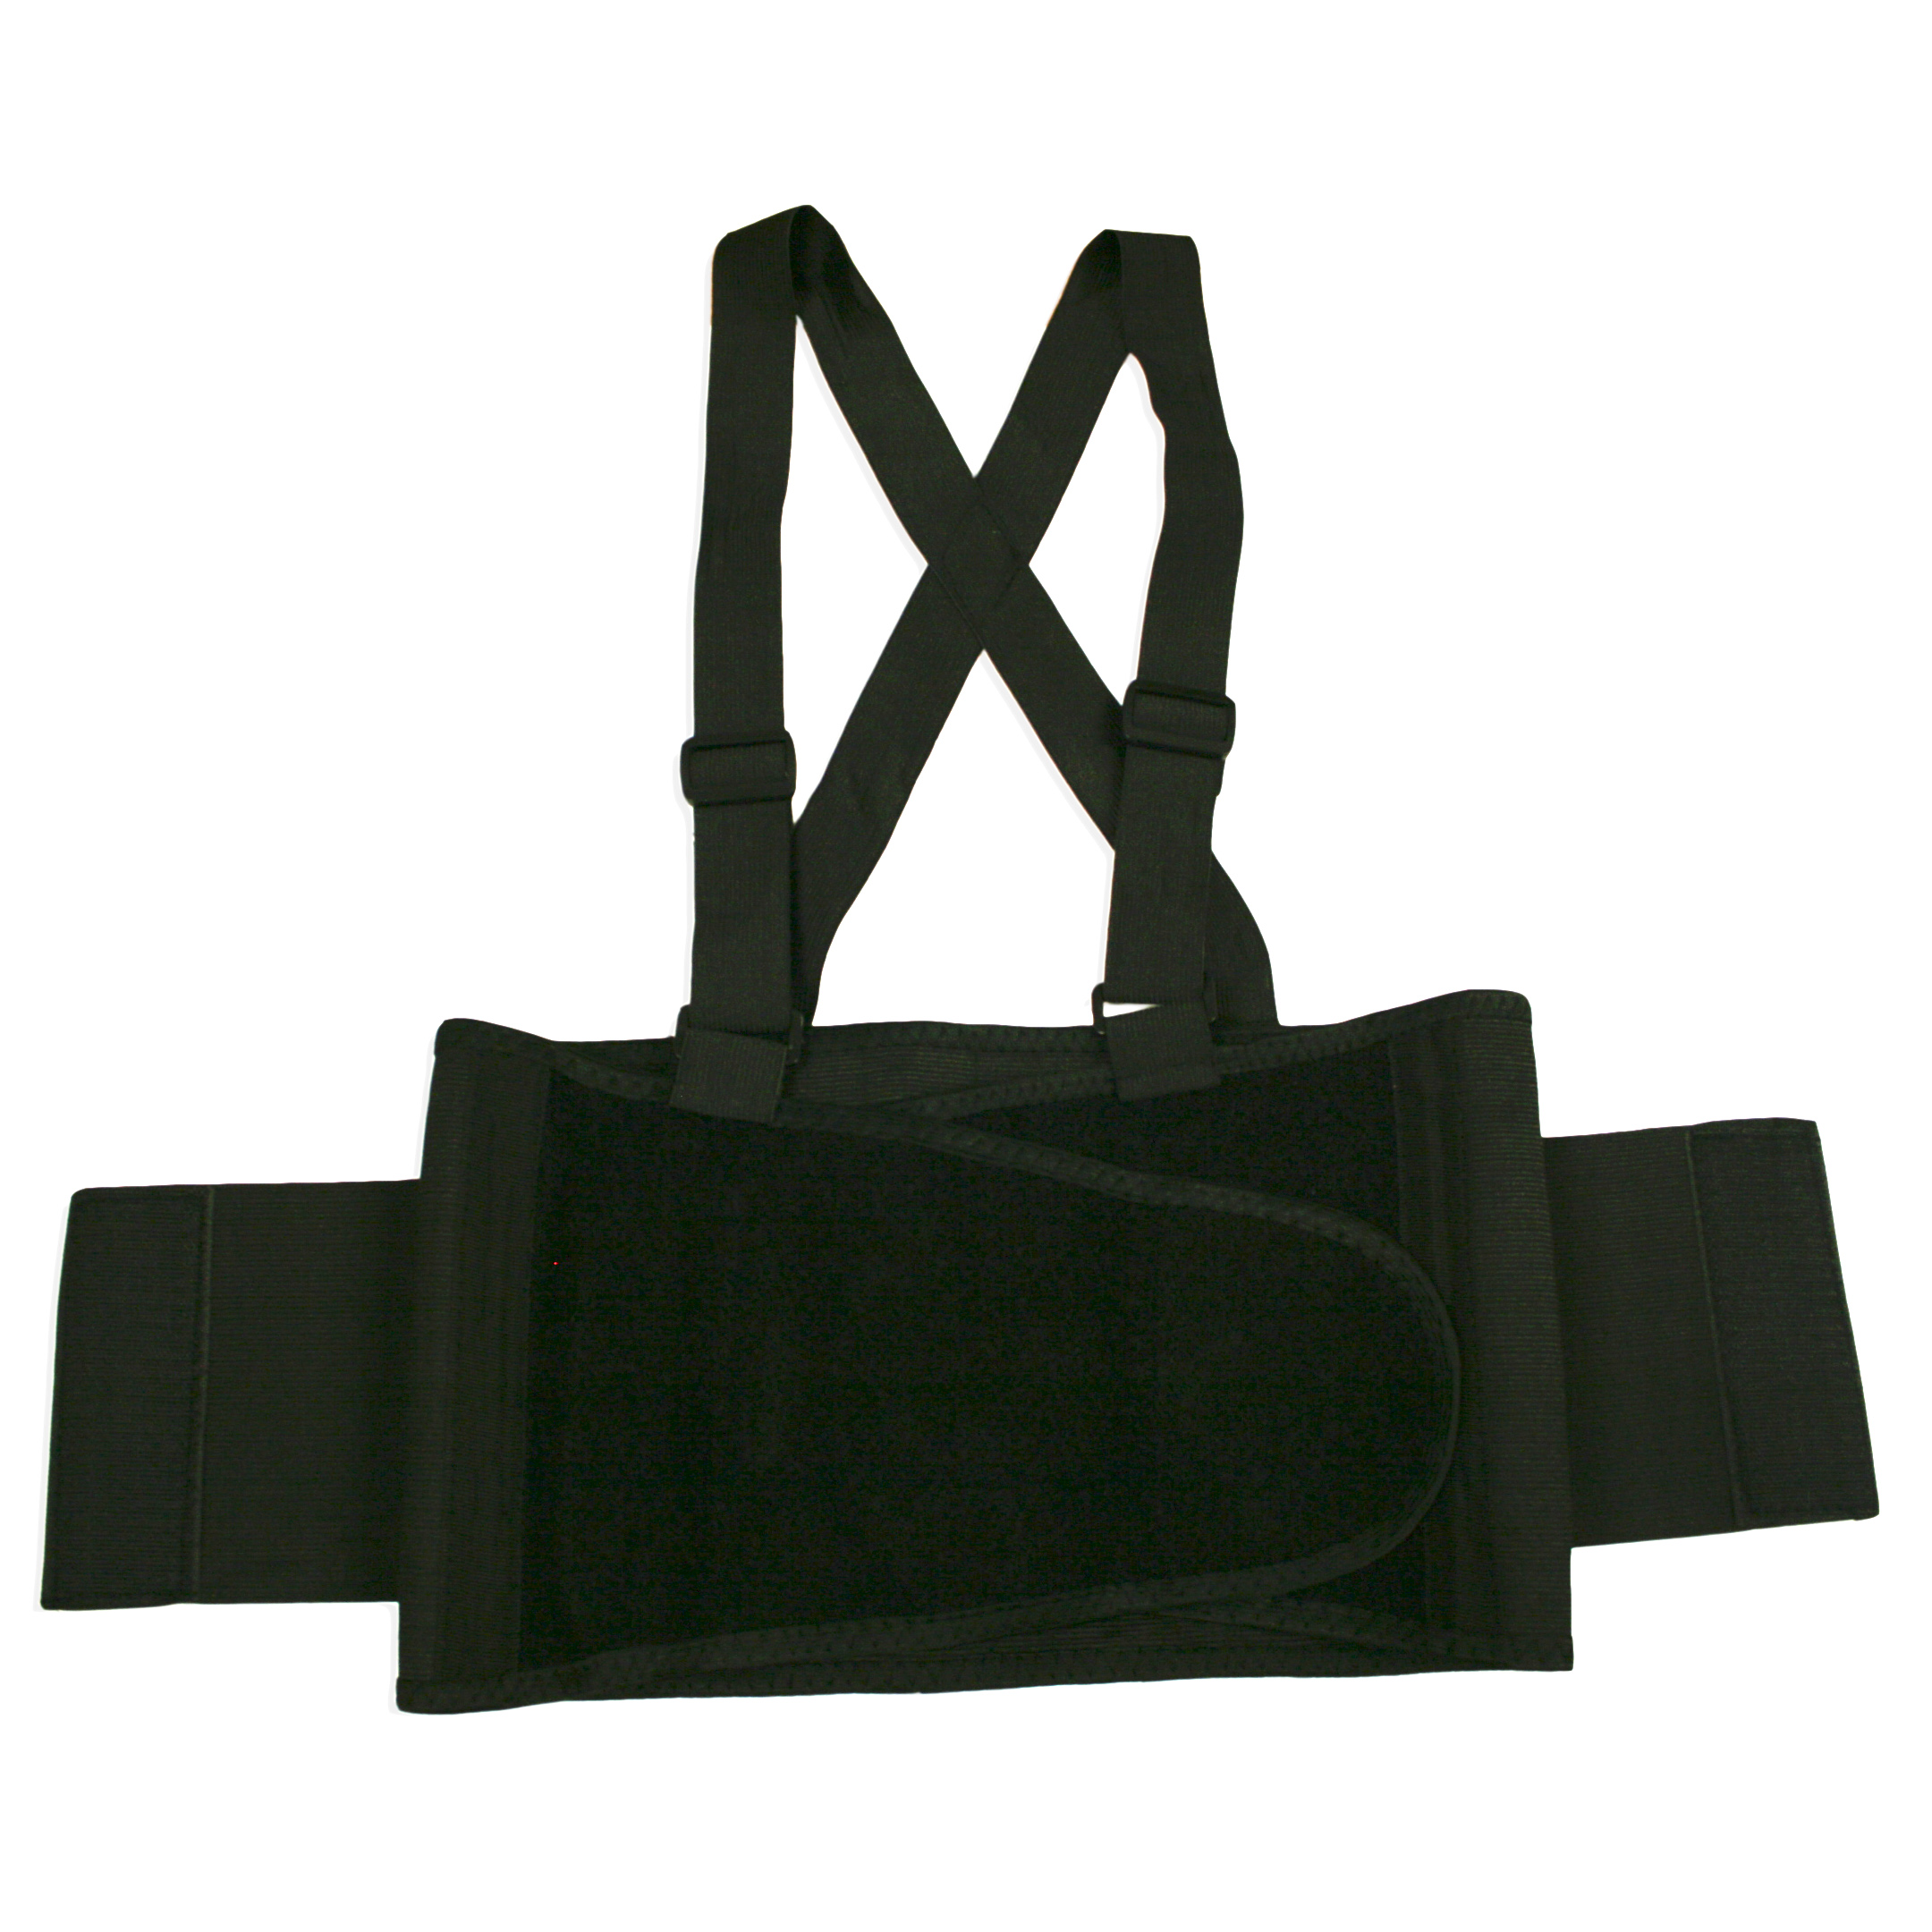 Small Back Support, Attached
Suspenders